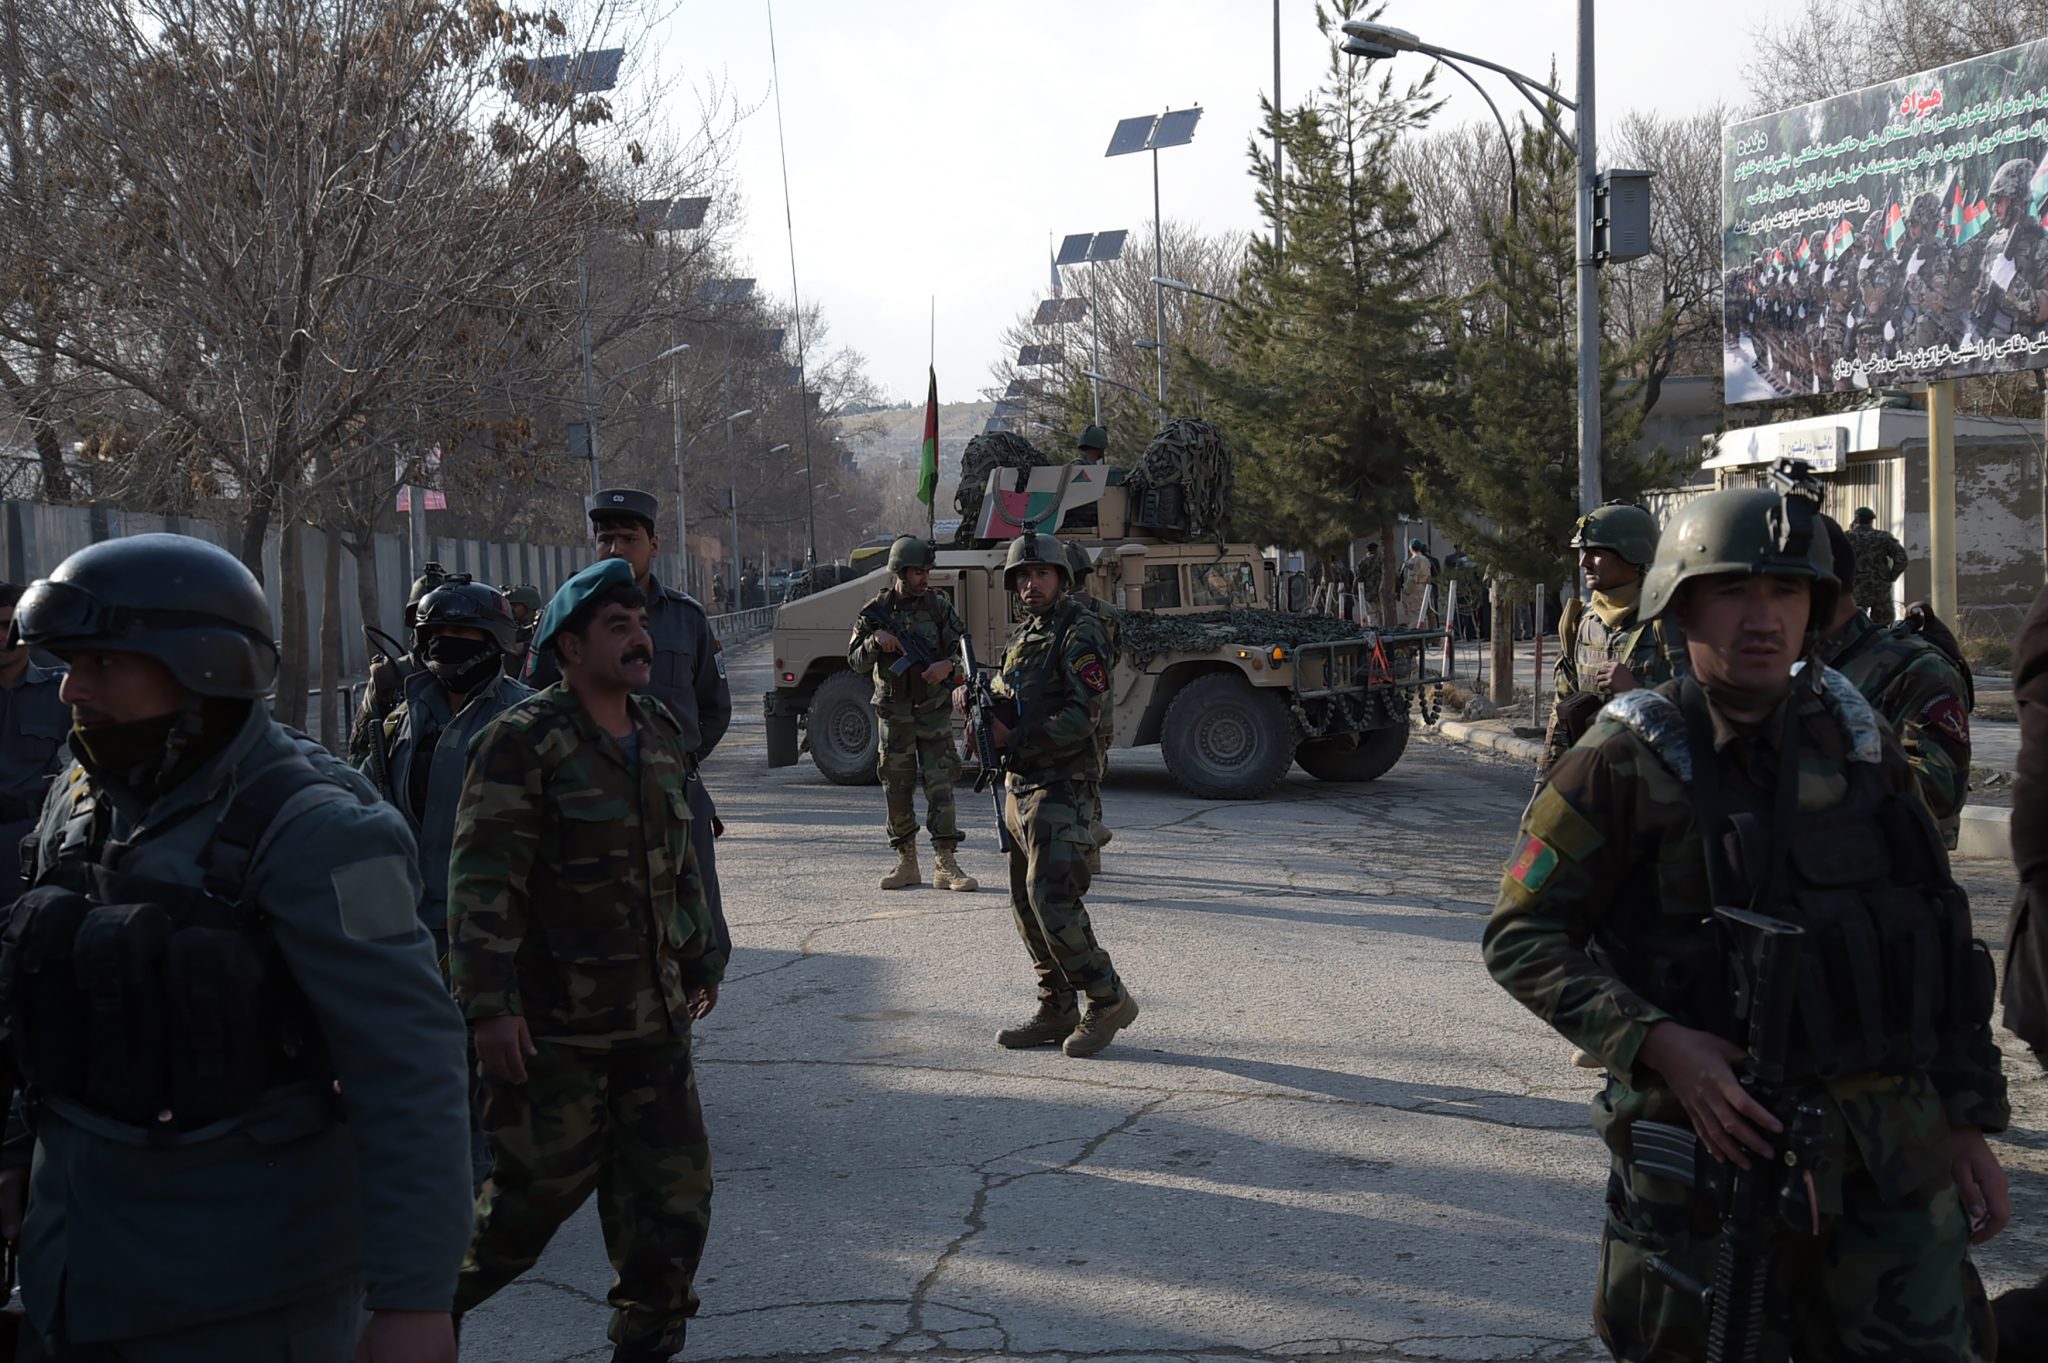 Afghan security personnel stand guard in front of the main gate of a military hospital in Kabul on March 8, 2017, after a deadly six-hour attack claimed by the Islamic State group. More than 30 people were killed and around 50 wounded in an insurgent attack on Afghanistan's largest military hospital in Kabul on March 8, the defence ministry said.  / AFP PHOTO / SHAH MARAI